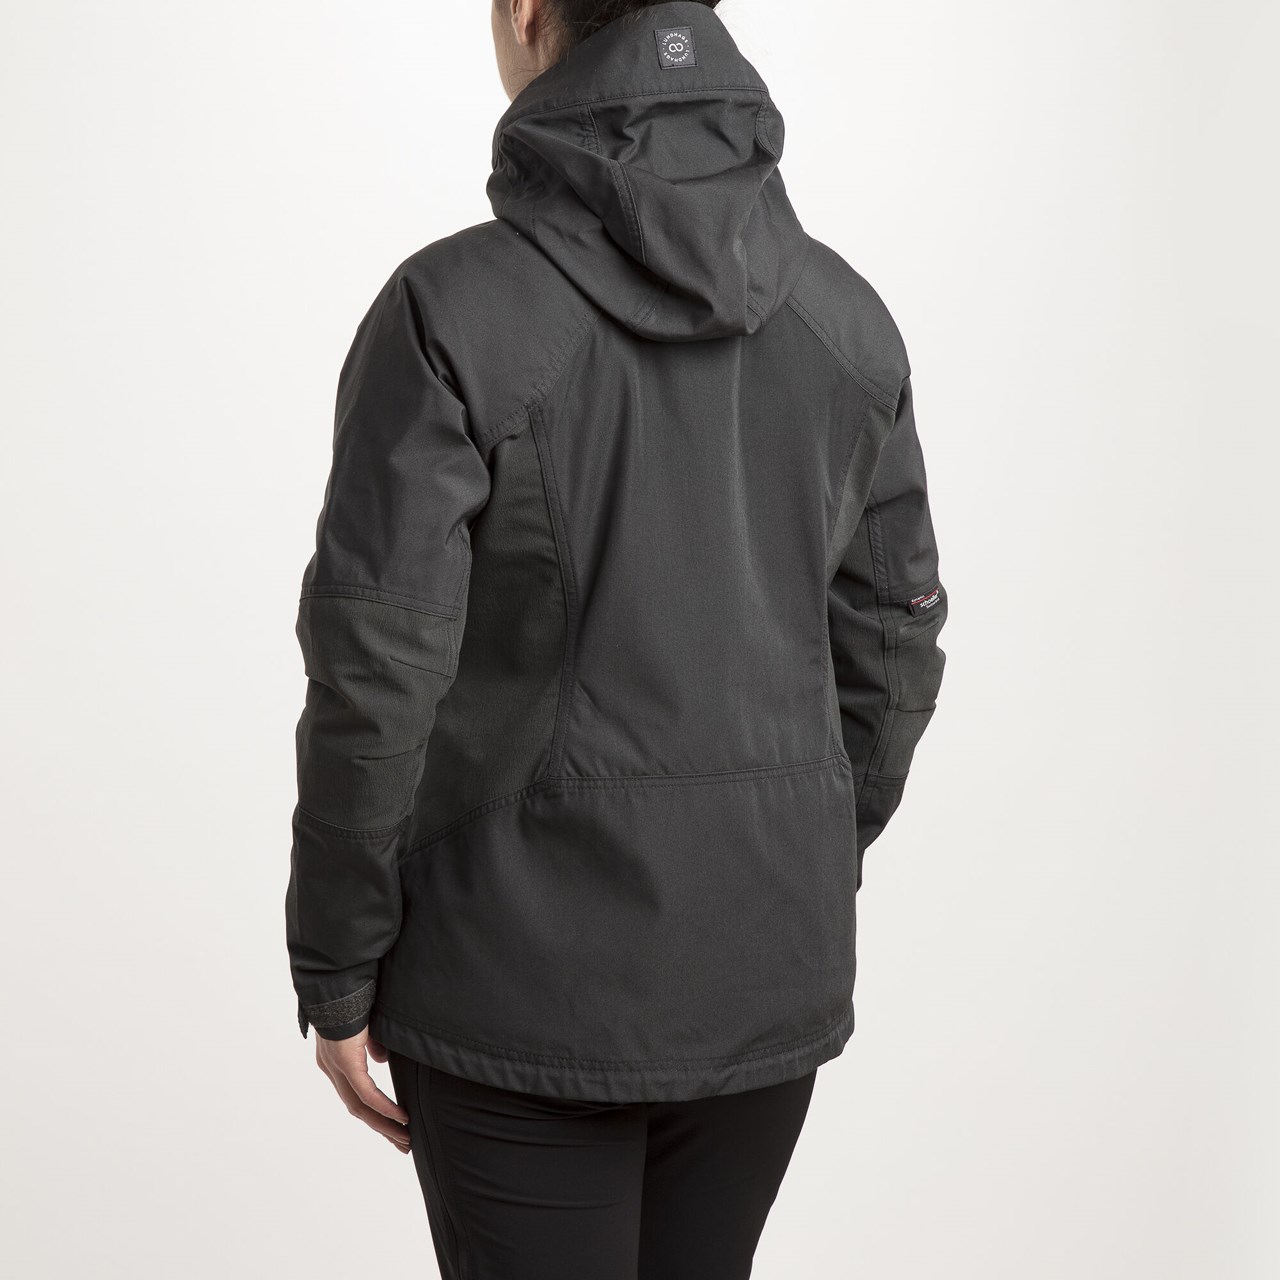 Lundhags "Authentic Ws Jacket" - charcoal